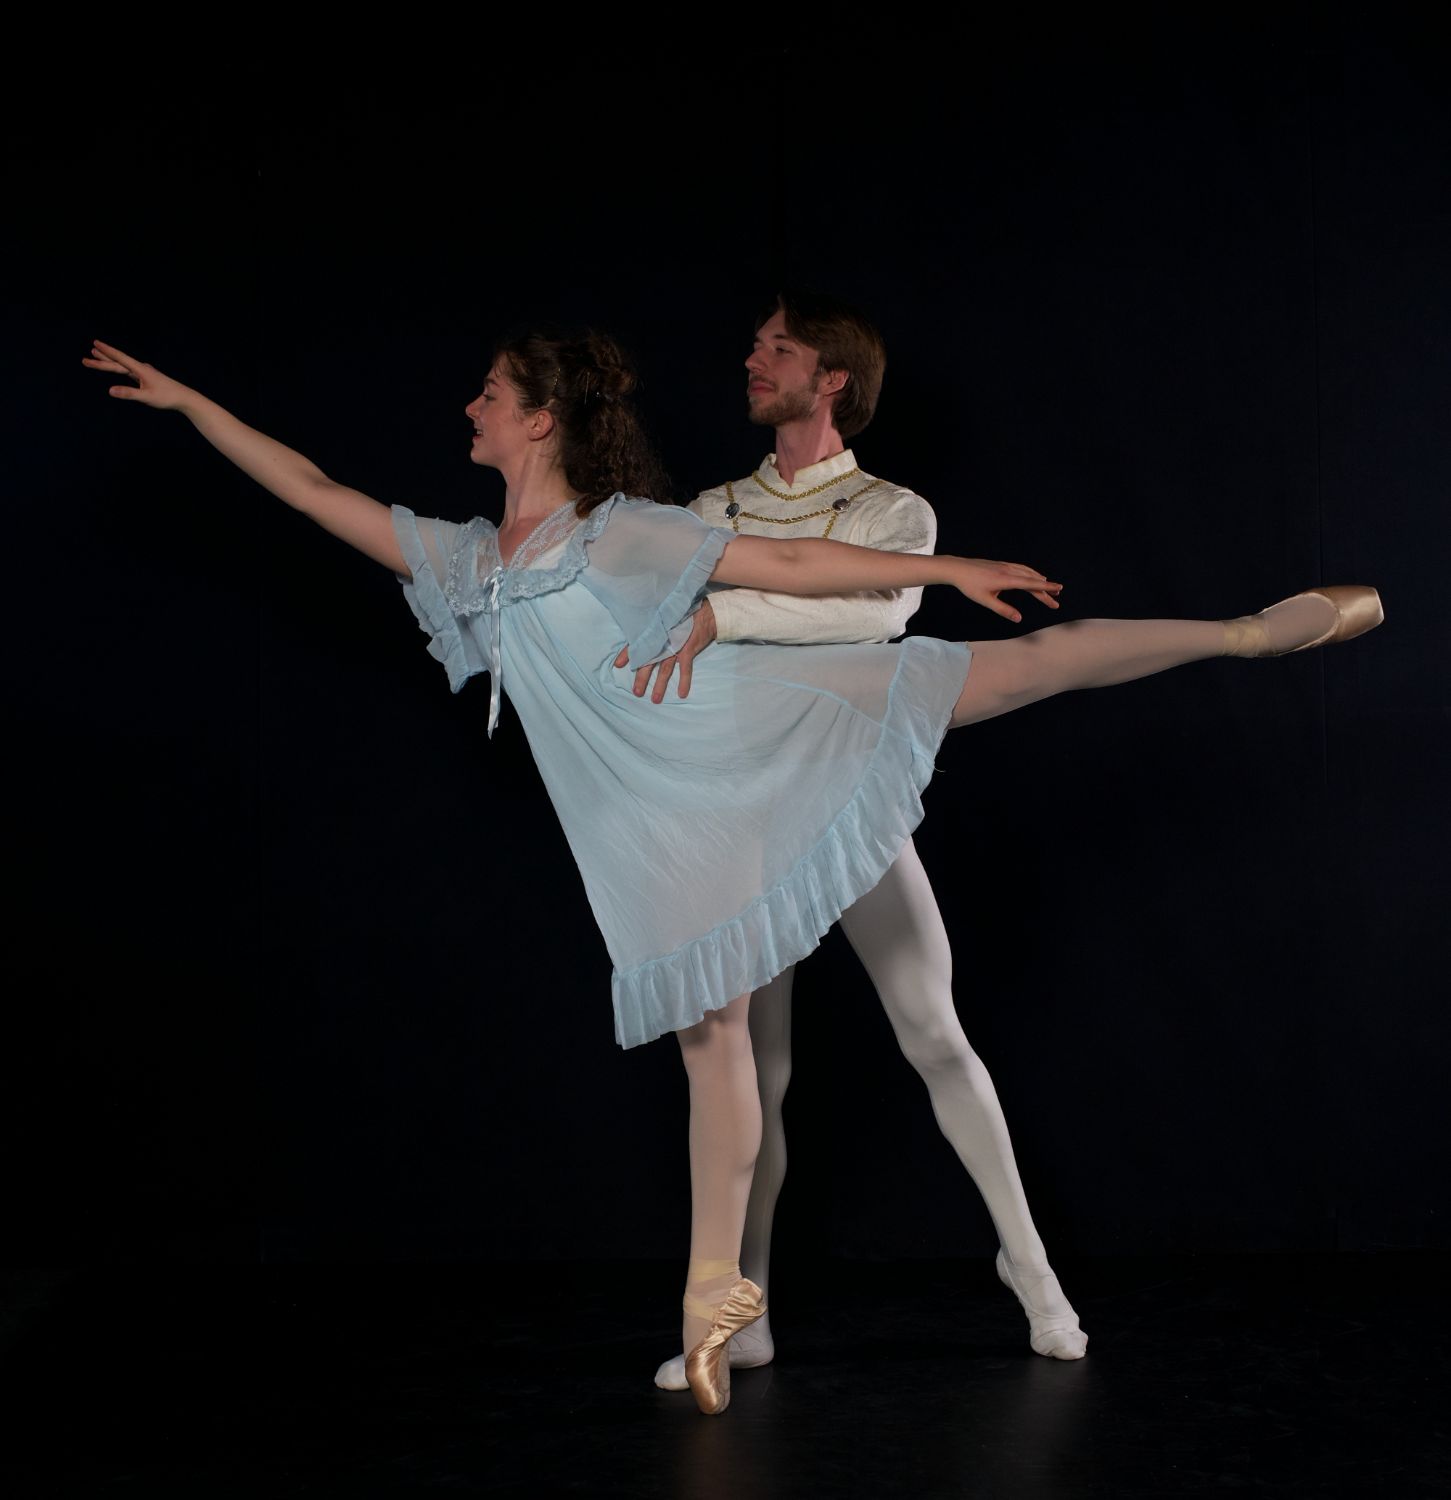 PHOTO: provided by PDT | The South Pasadenan | Pasadena Dance Theatre presents The Nutcracker at San Gabriel Mission Playhouse. Amy Sauer and Jacob Schmieder-Hacker, who will dance as the lead roles of Clara and Hans.